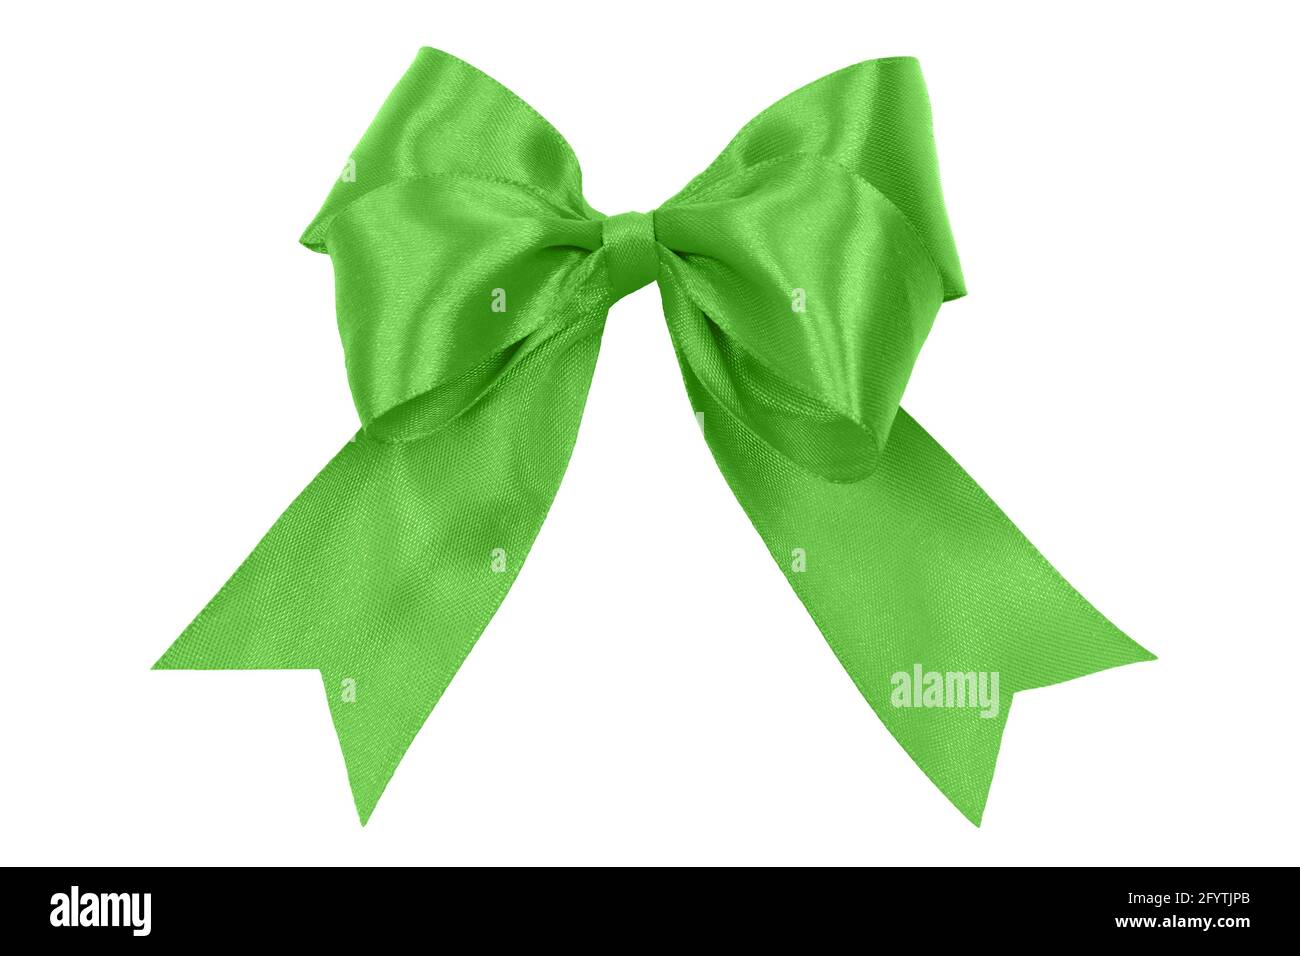 Isolated shiny green satin bow with no shadows in close-up. PNG file with transparent background. Stock Photo